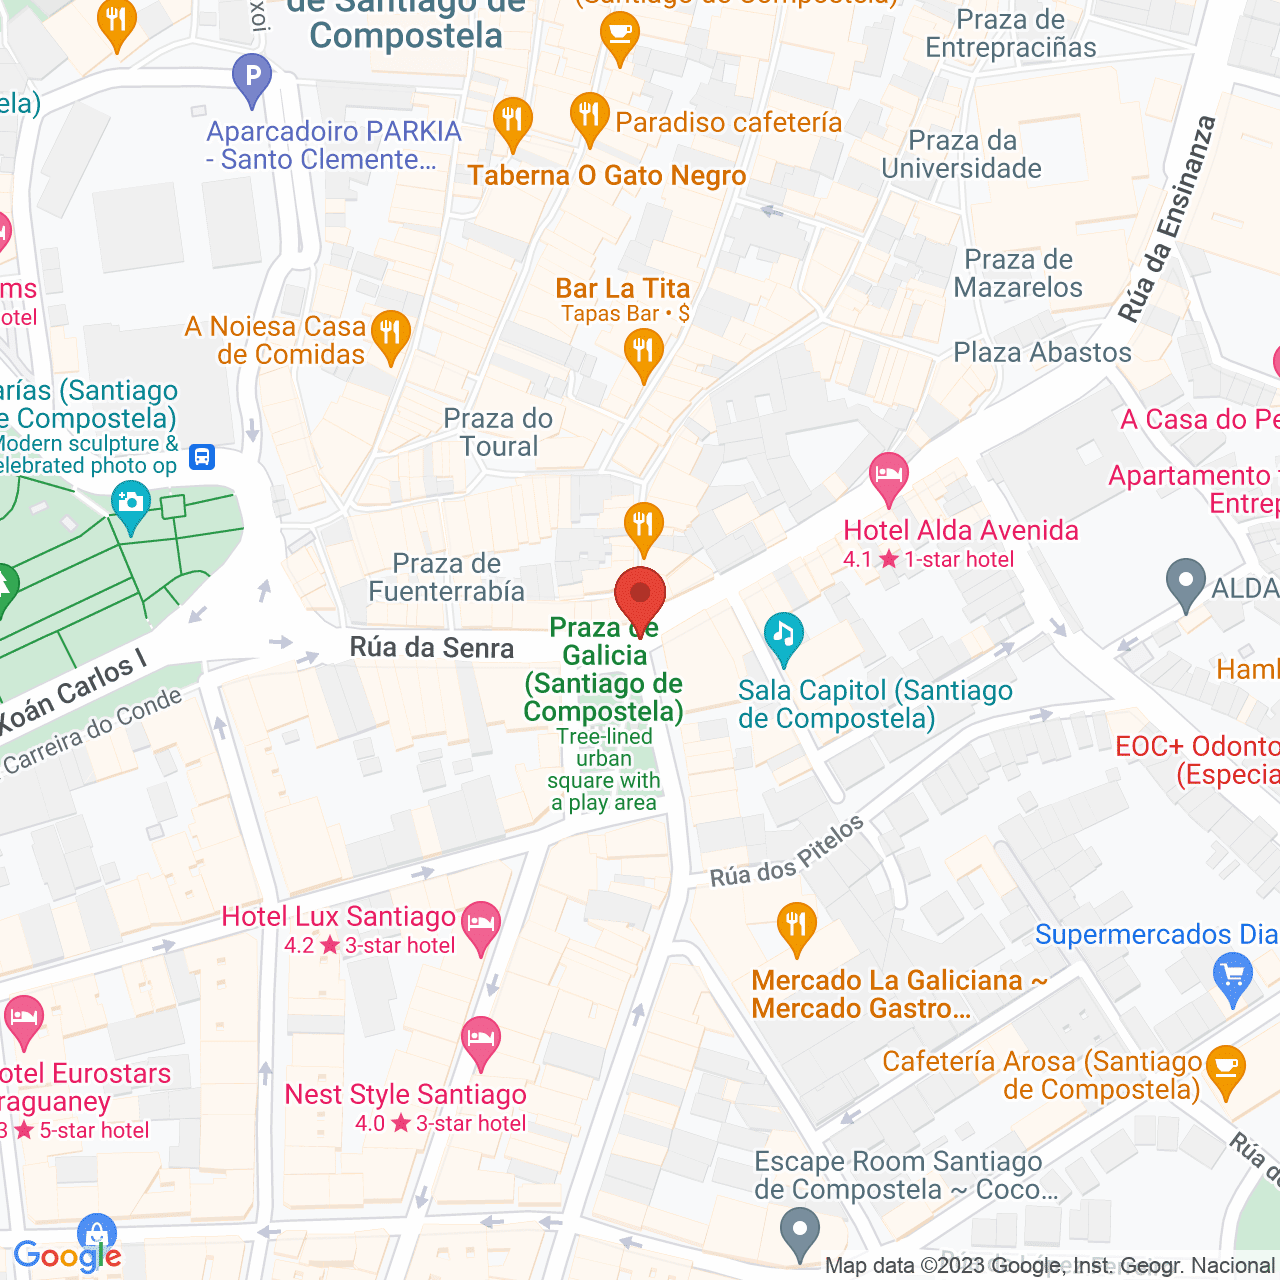 https://maps.googleapis.com/maps/api/staticmap?zoom=10&maptype=hybrid&scale=4&center=42.8768606,-8.5441729&markers=color:red%7C%7C42.8768606,-8.5441729&size=1000x1000&key=AIzaSyAQg6Liu52-a7wn17F9B-5c4QmJ9kTO3Mo